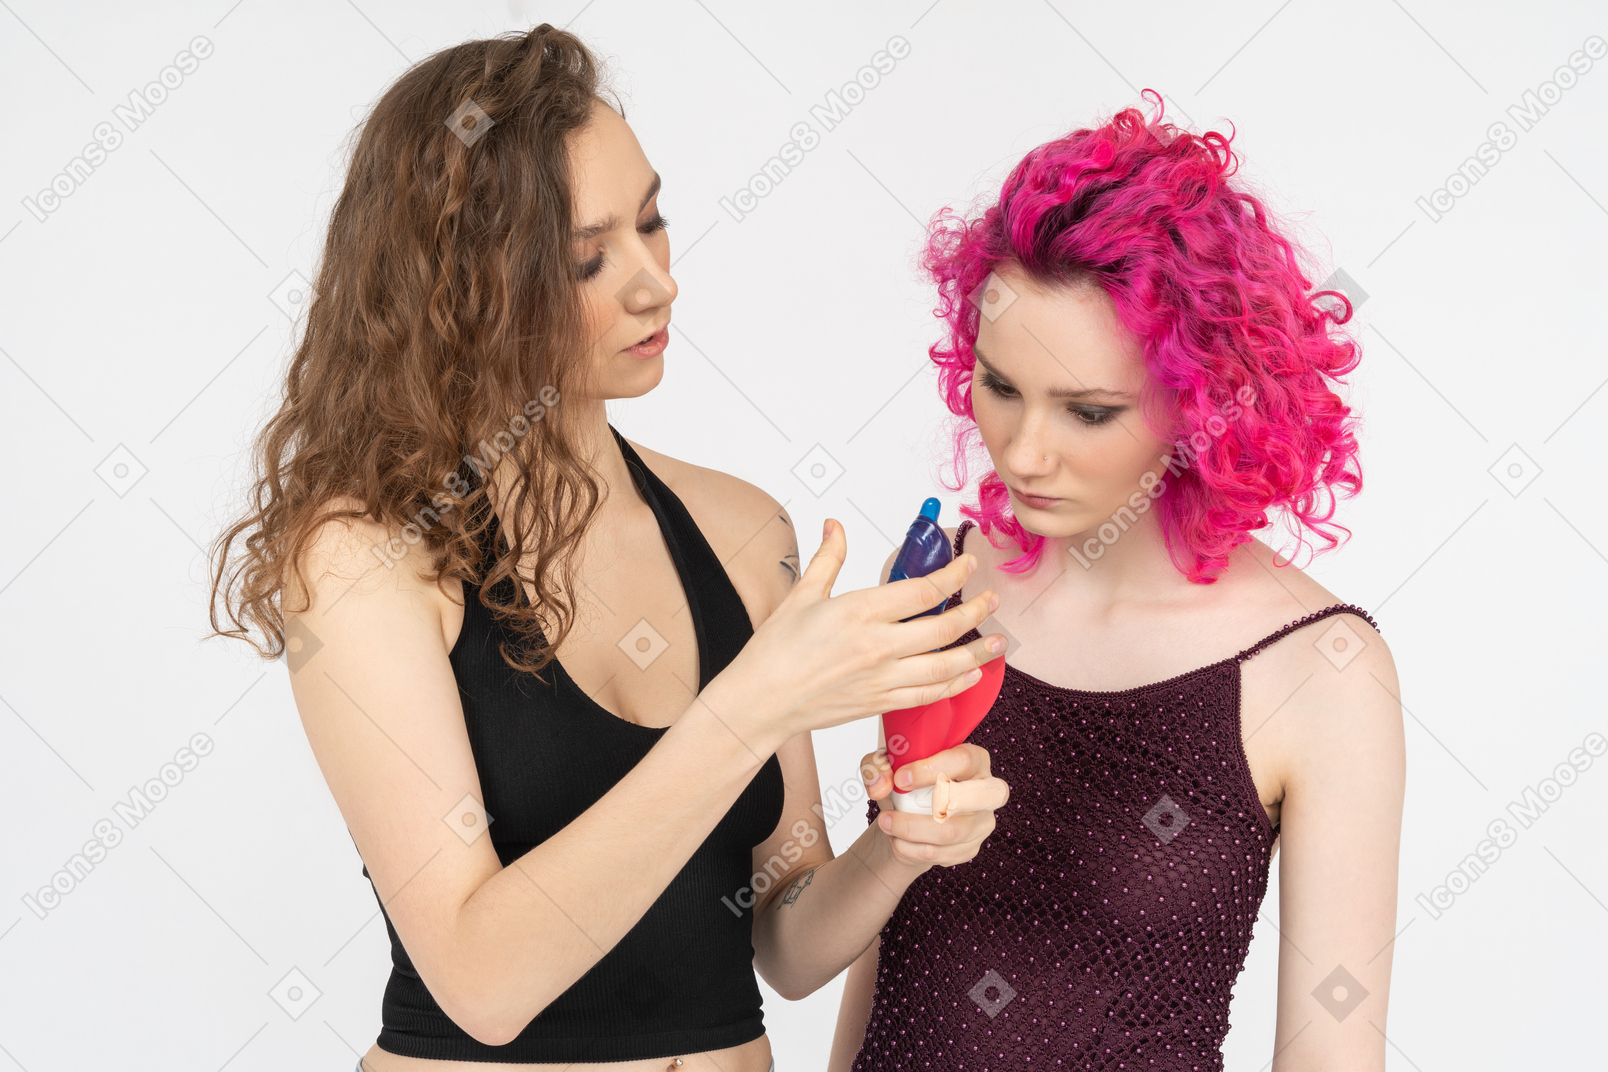 Elder sister teaching younger one to use condoms